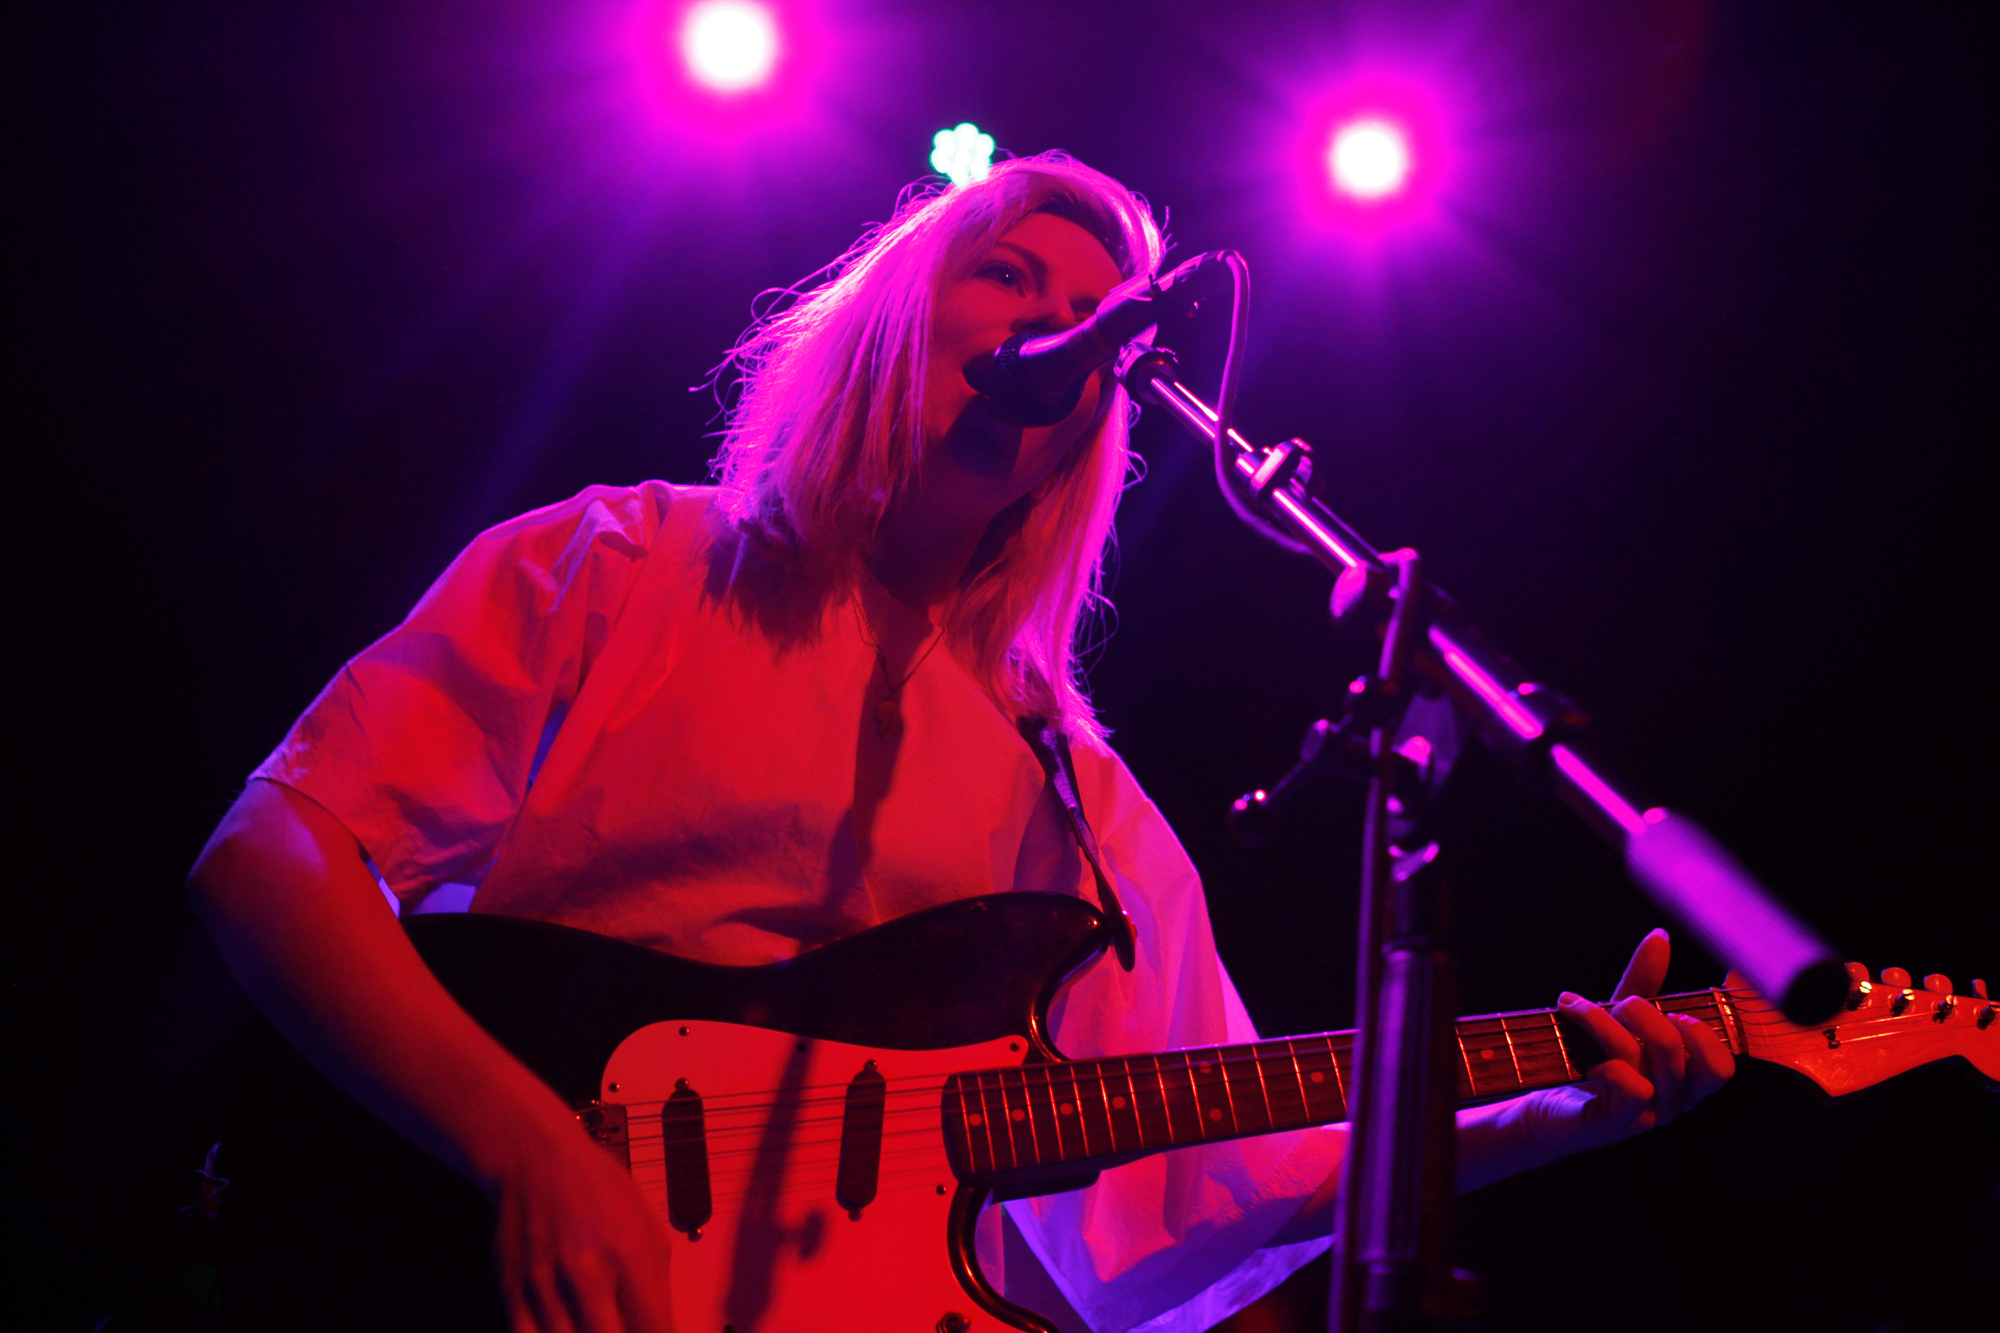 Alvvays plays at Rough Trade in Williamsburg, Brooklyn, NY on July 28, 2014.